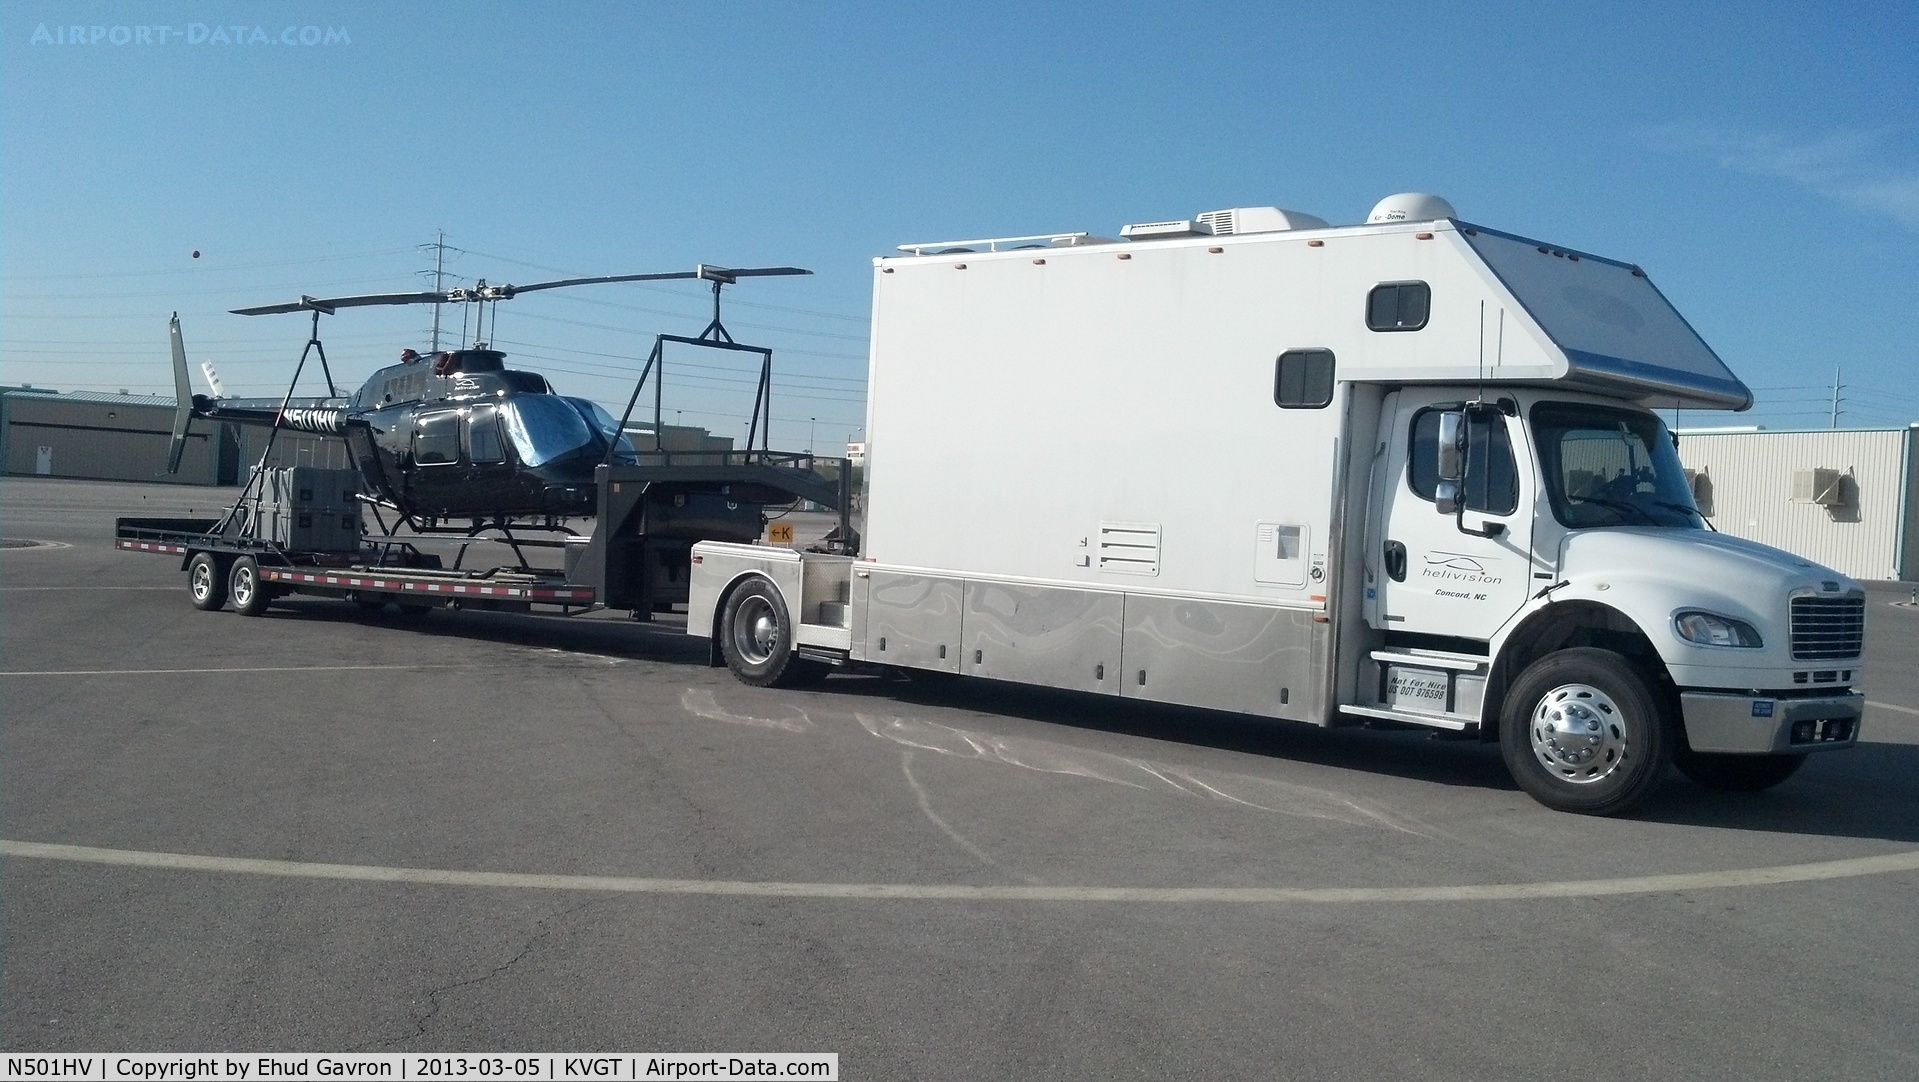 N501HV, 1980 Bell 206B JetRanger III C/N 2981, The ultimate retirement vehicle... an RV towing a Bell 206!